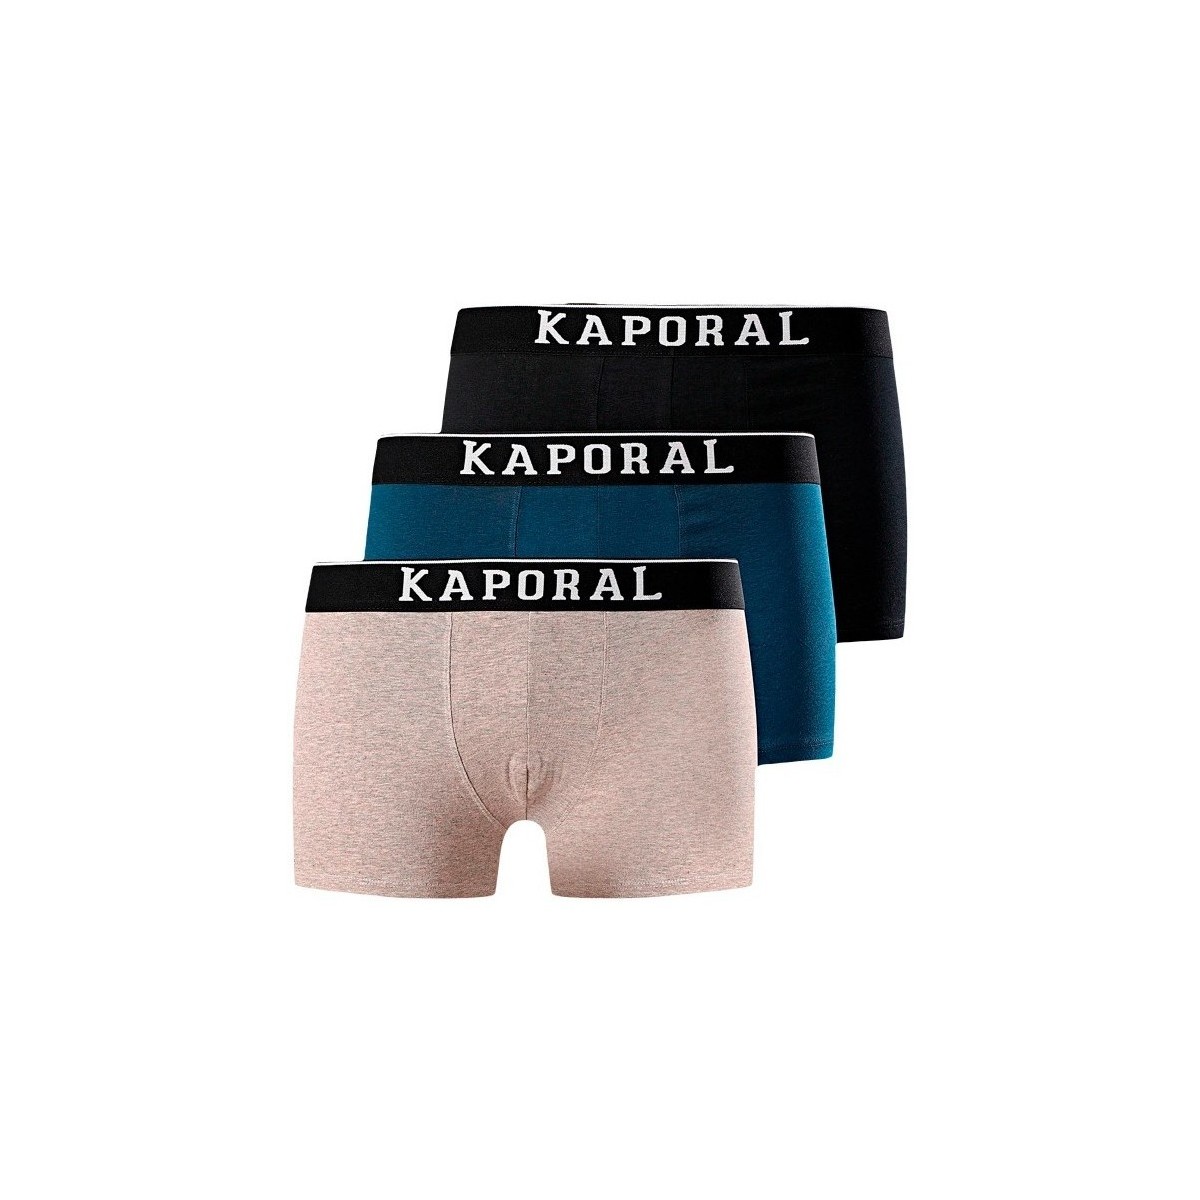 Kaporal Multicolore Pack x3 front logo 0i76BMIE